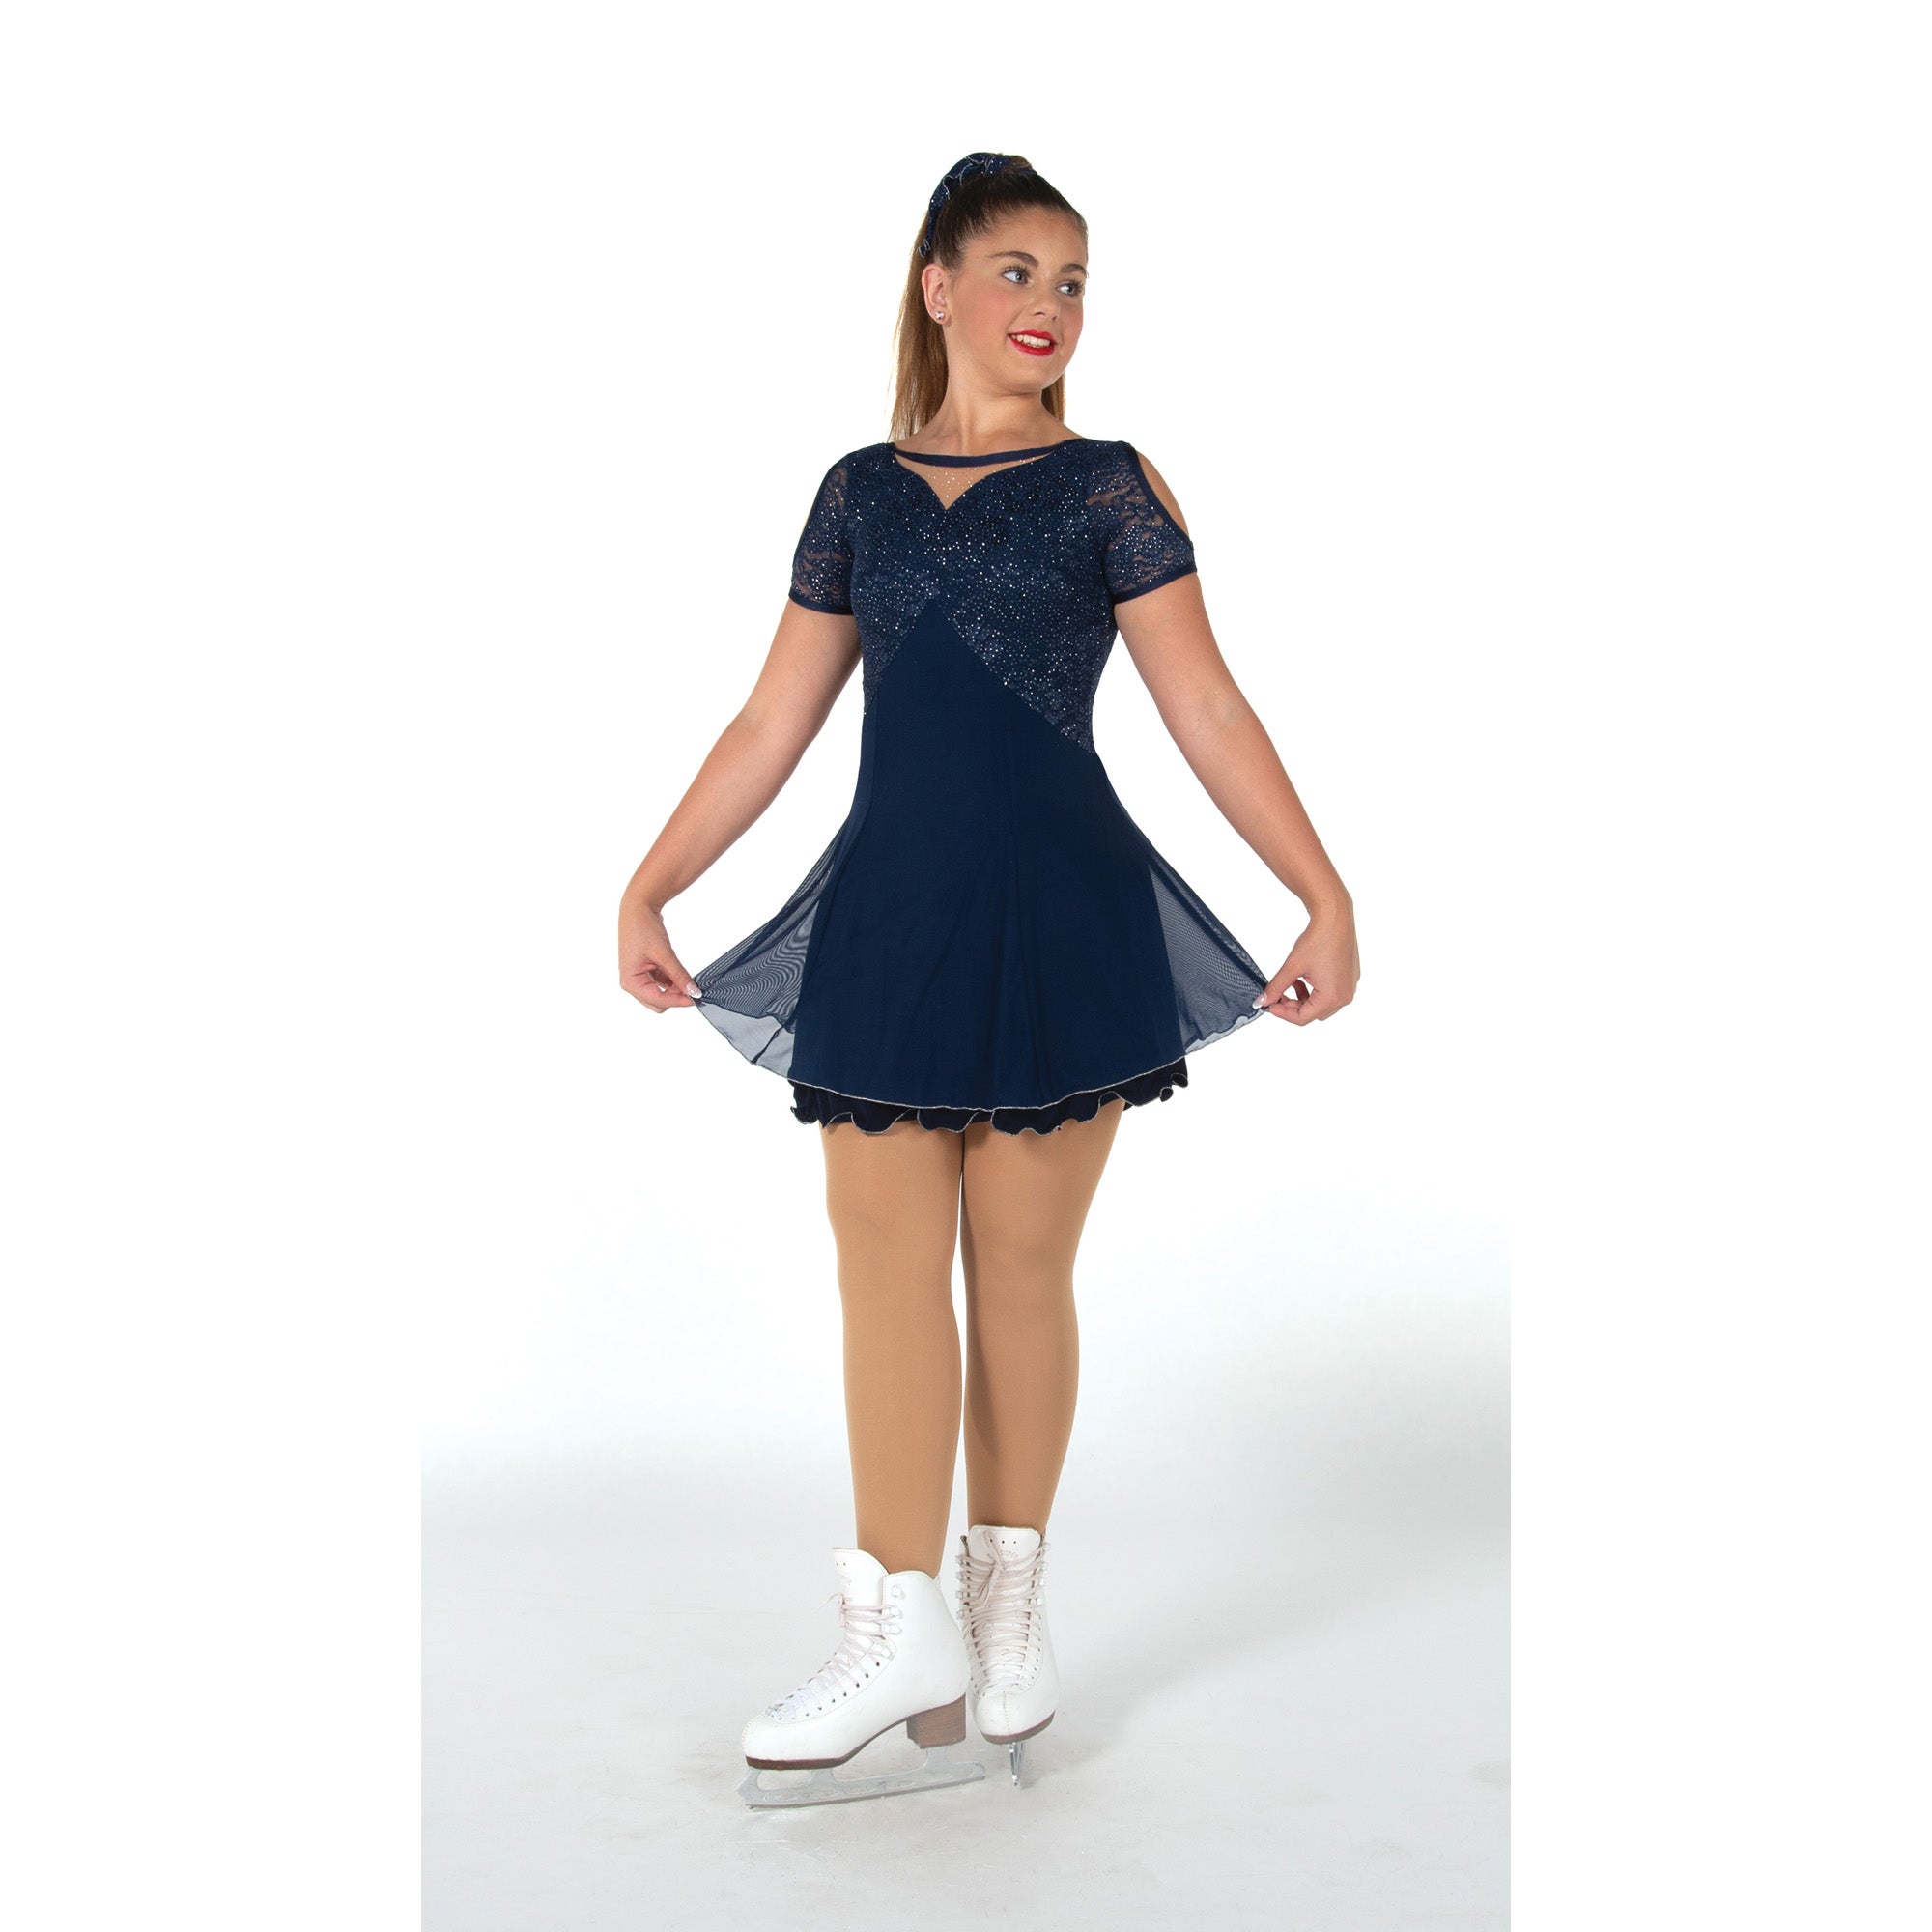 45 Empiresque Skating Dress in Navy Blue by Jerry's